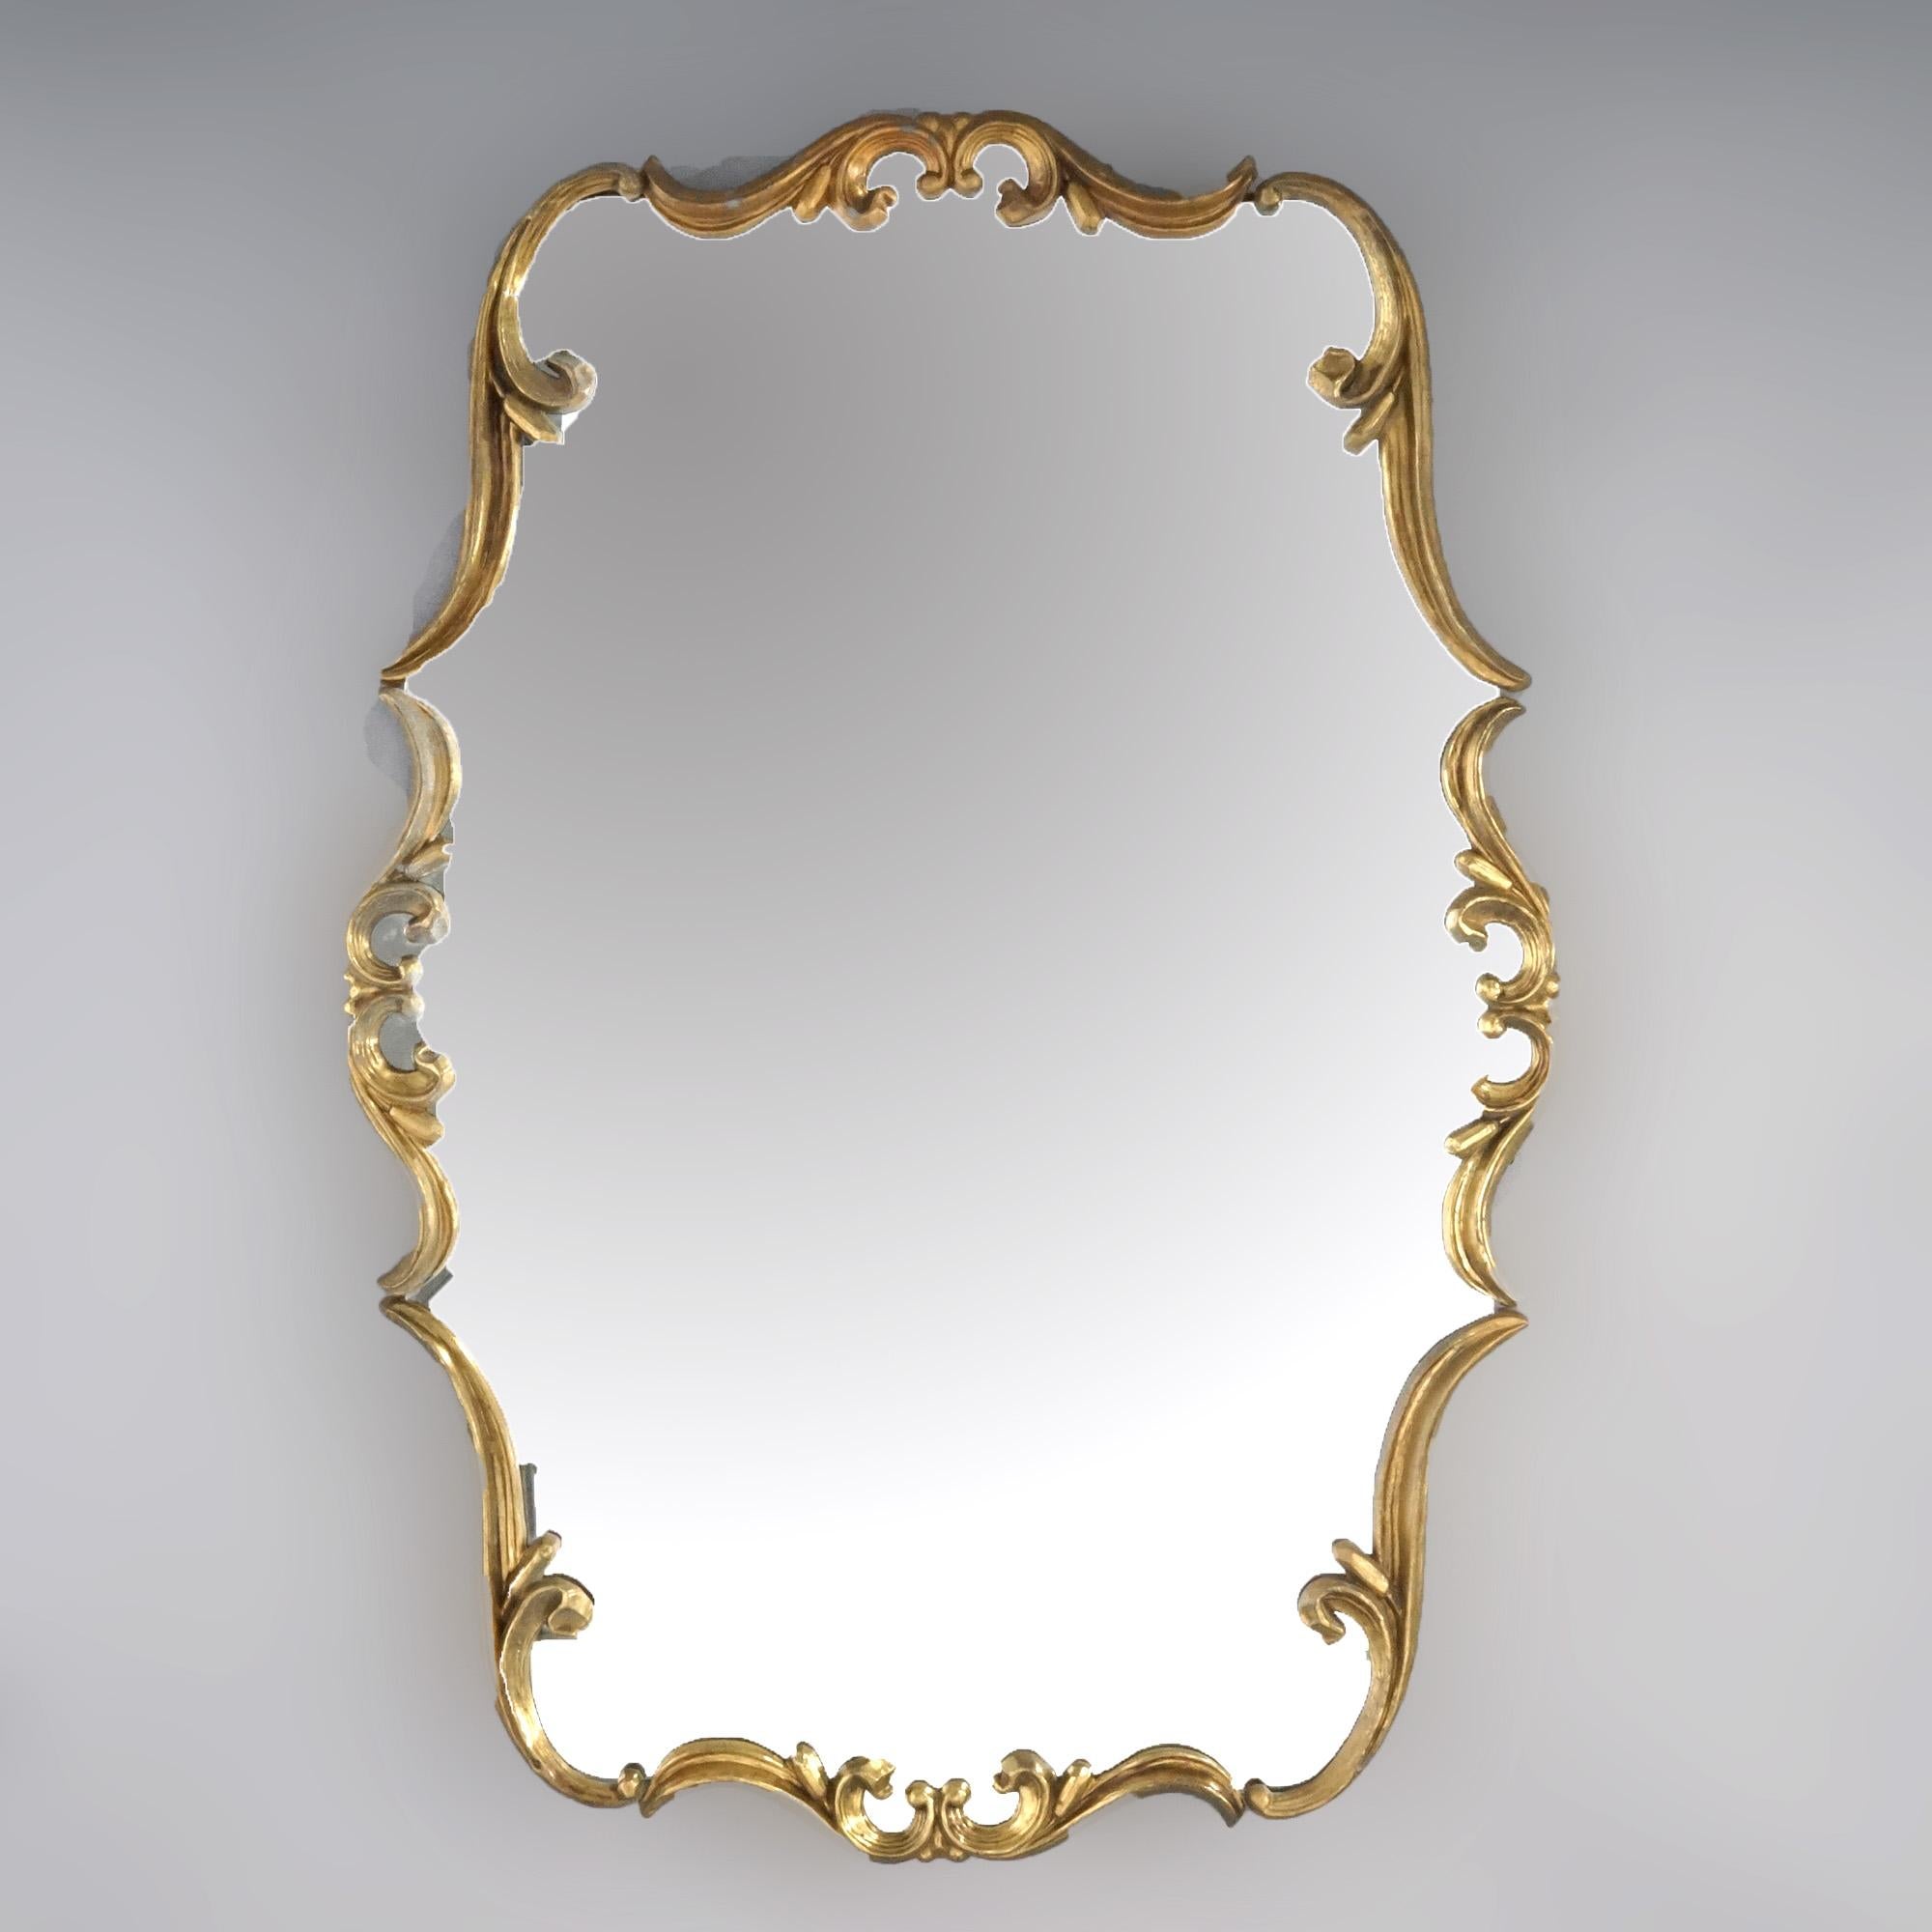 An antique French Empire style wall mirror offers bronzed metal scroll form frame, circa 1920

Measures - 44.25